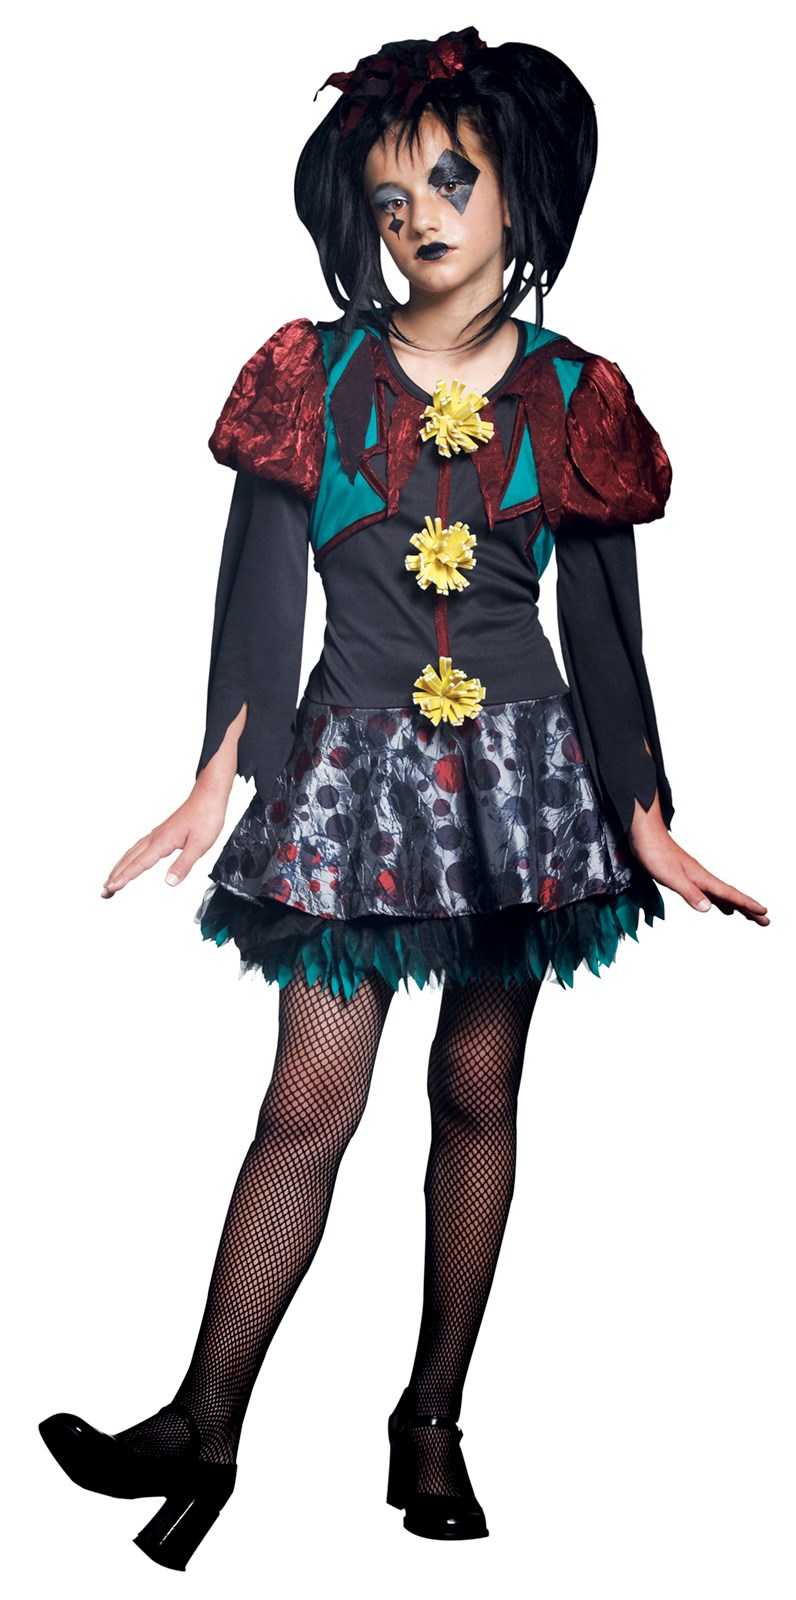 Scary Merry Child Costume